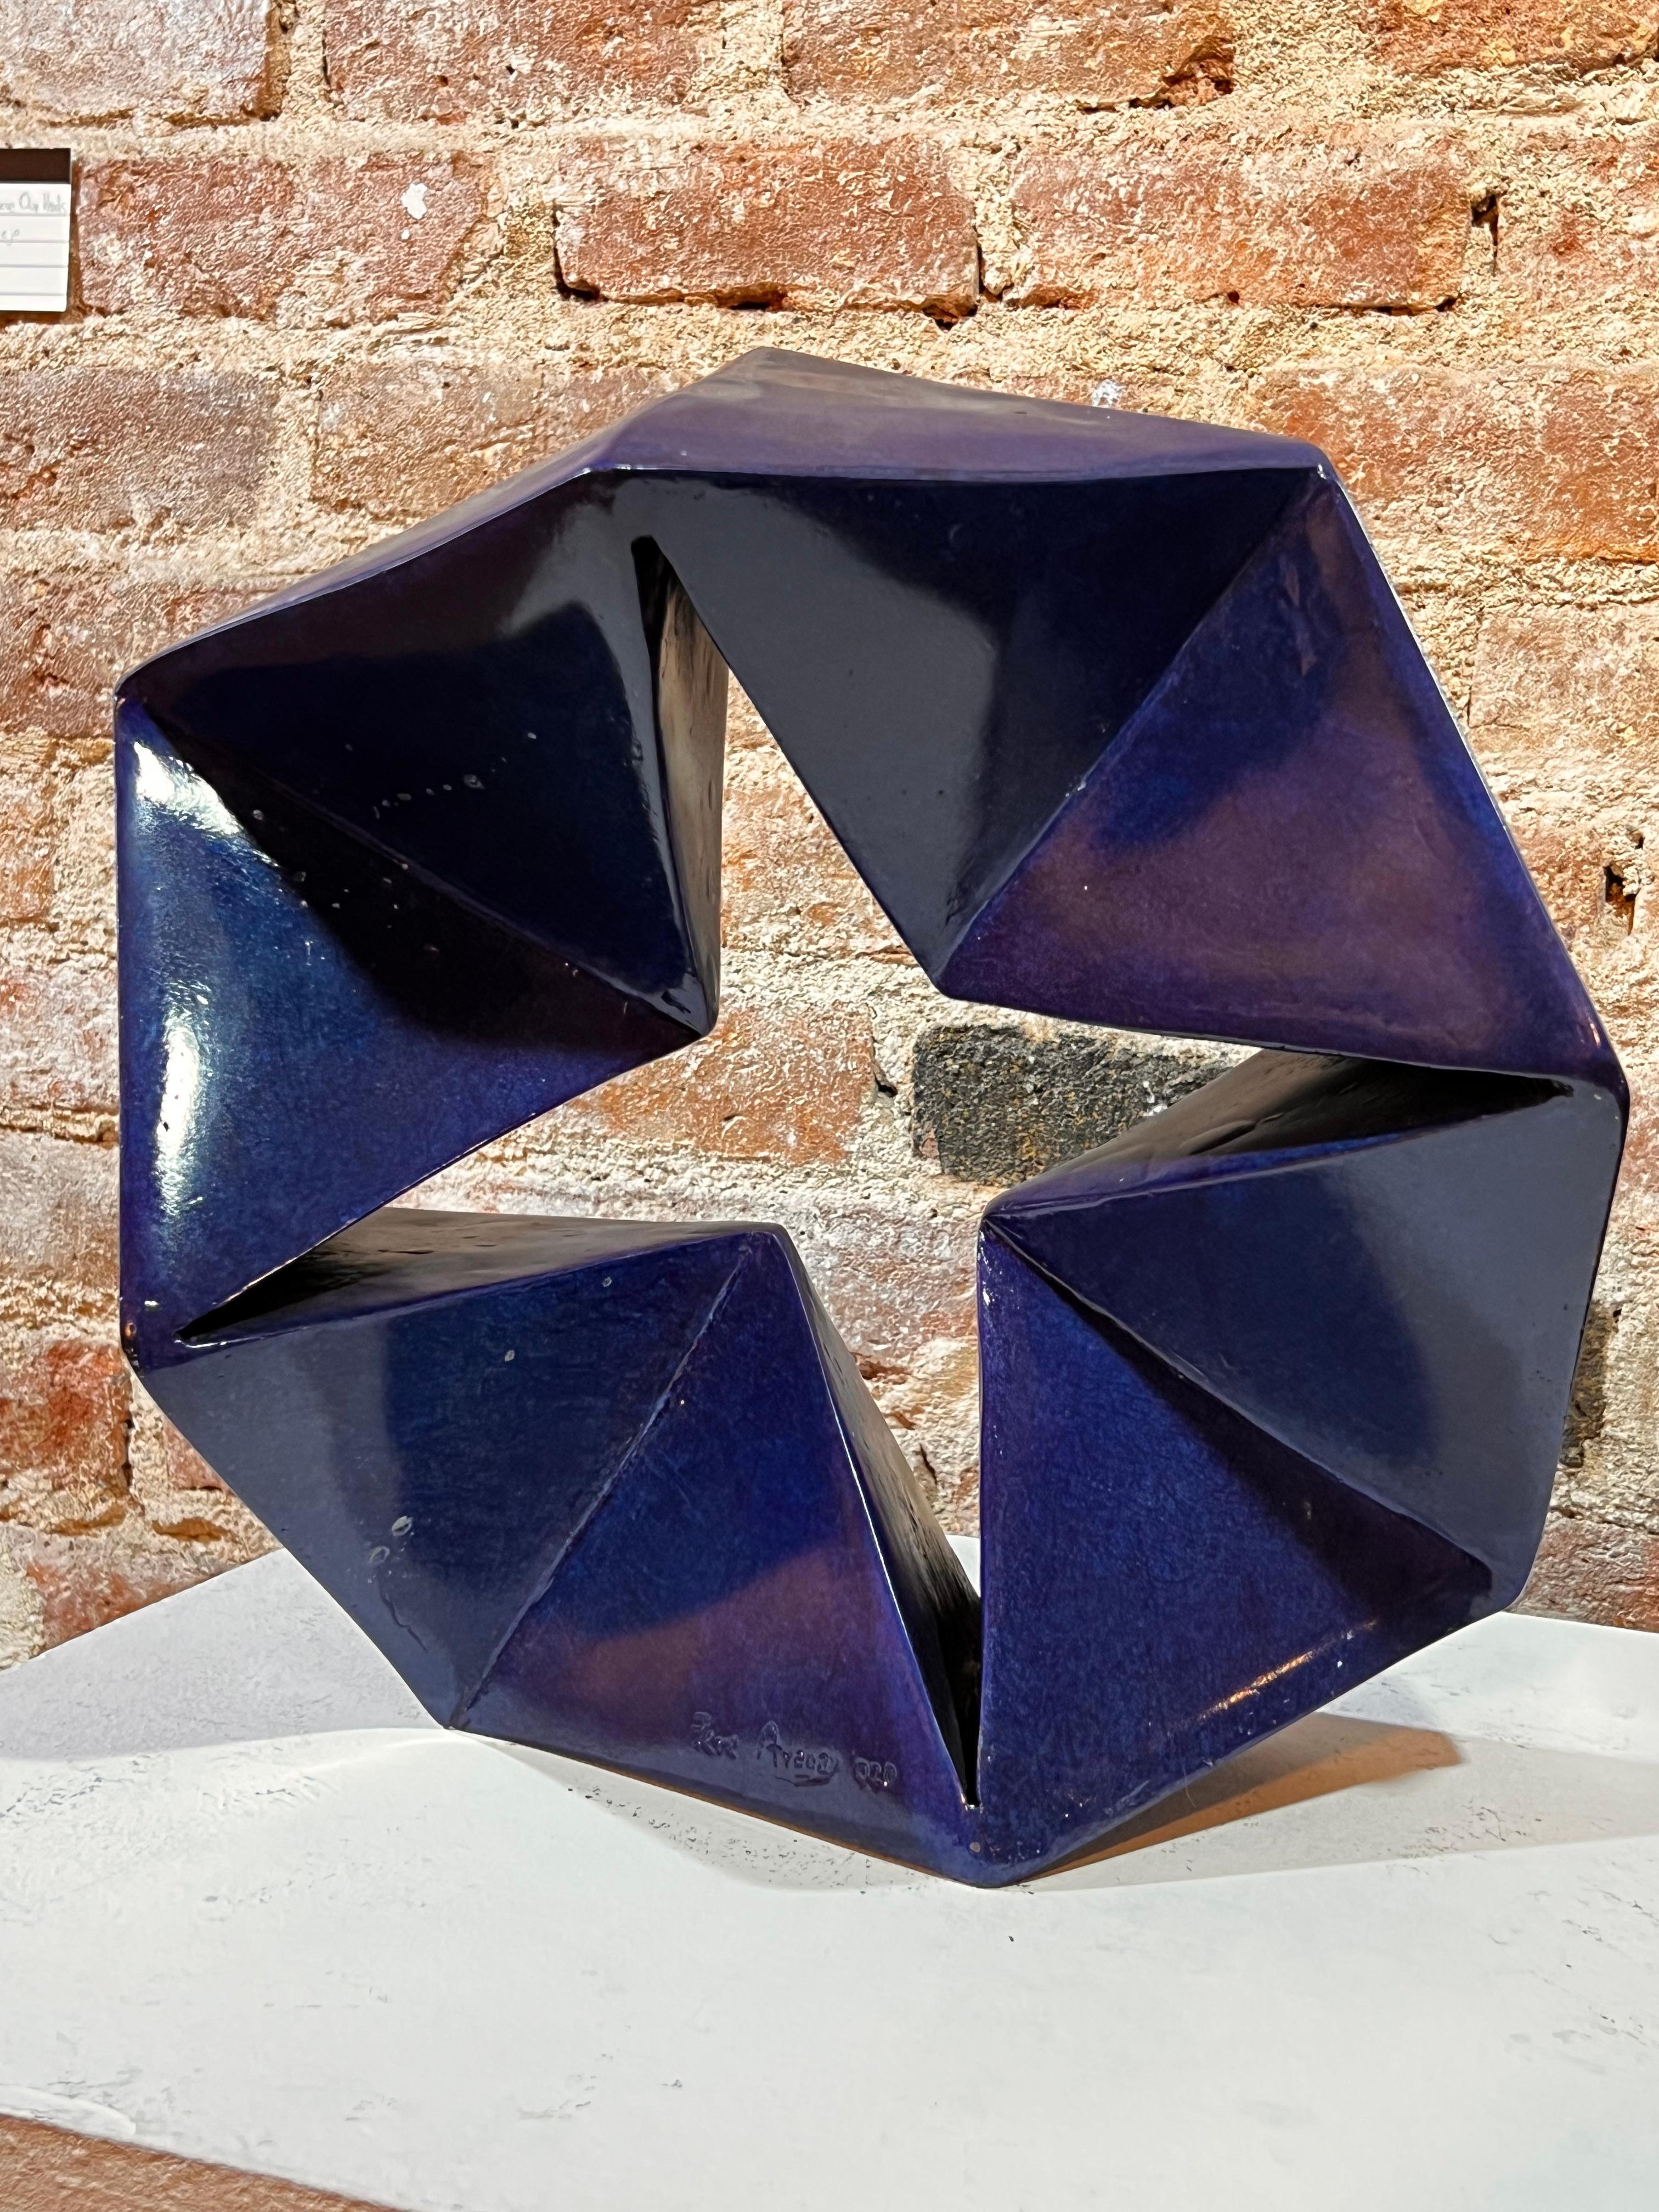 Untitled - Abstract Sculpture by Pere Aragay